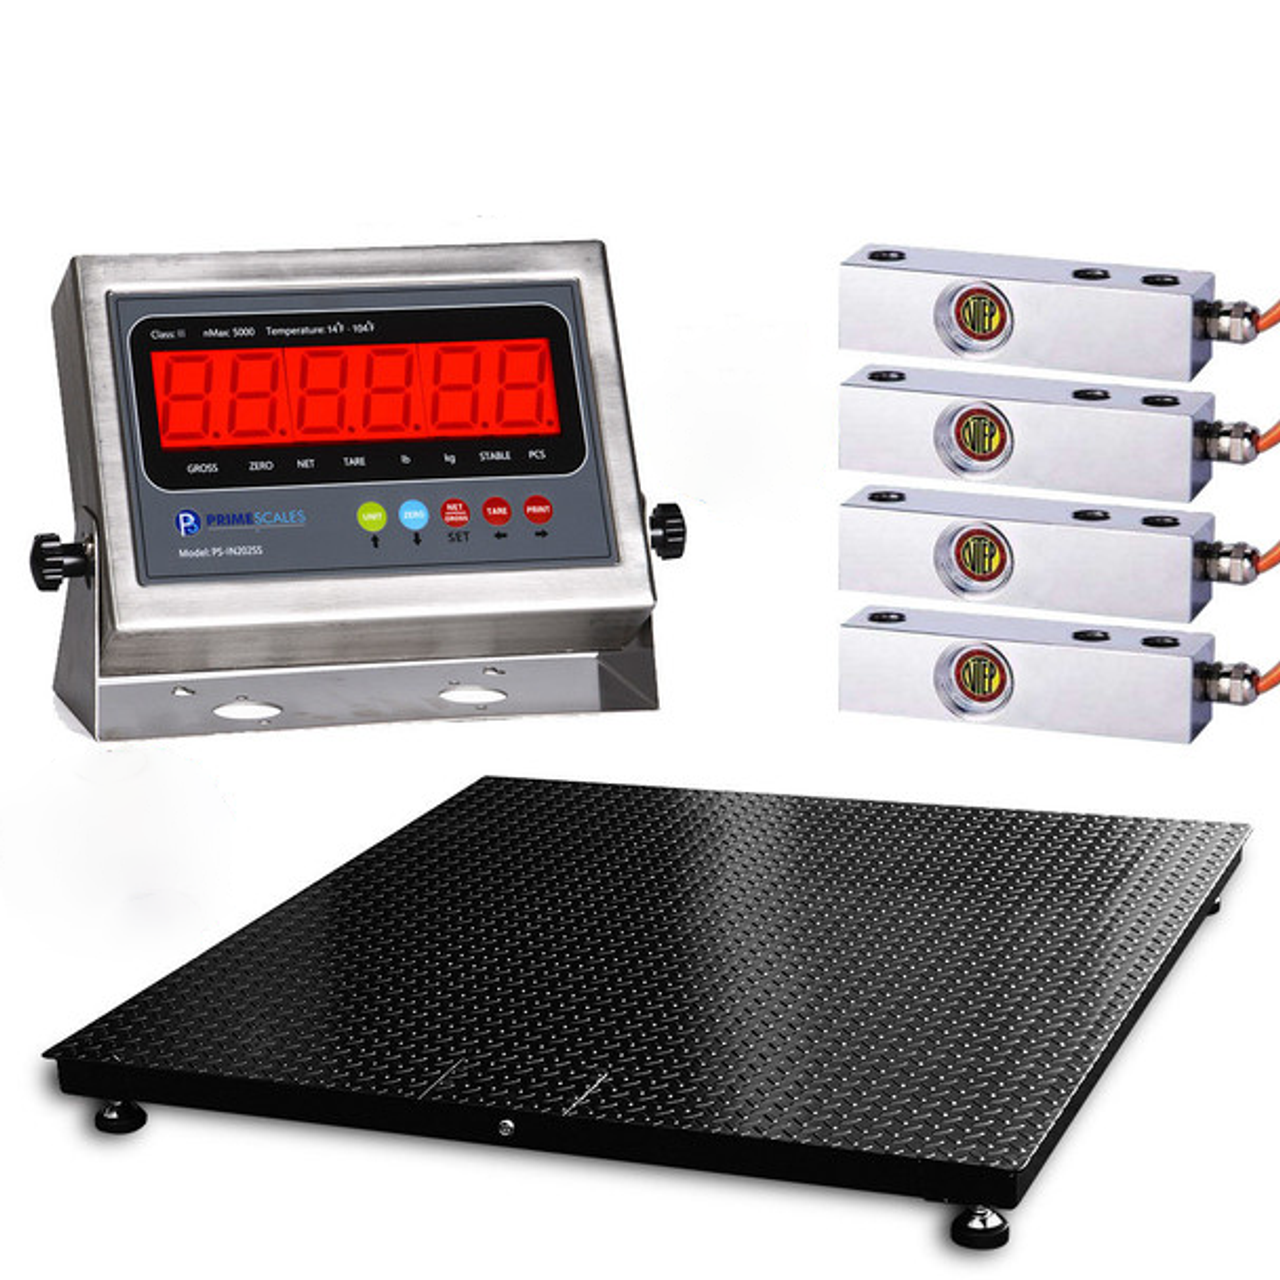 Zenith Large Platform Precision Counting Scale